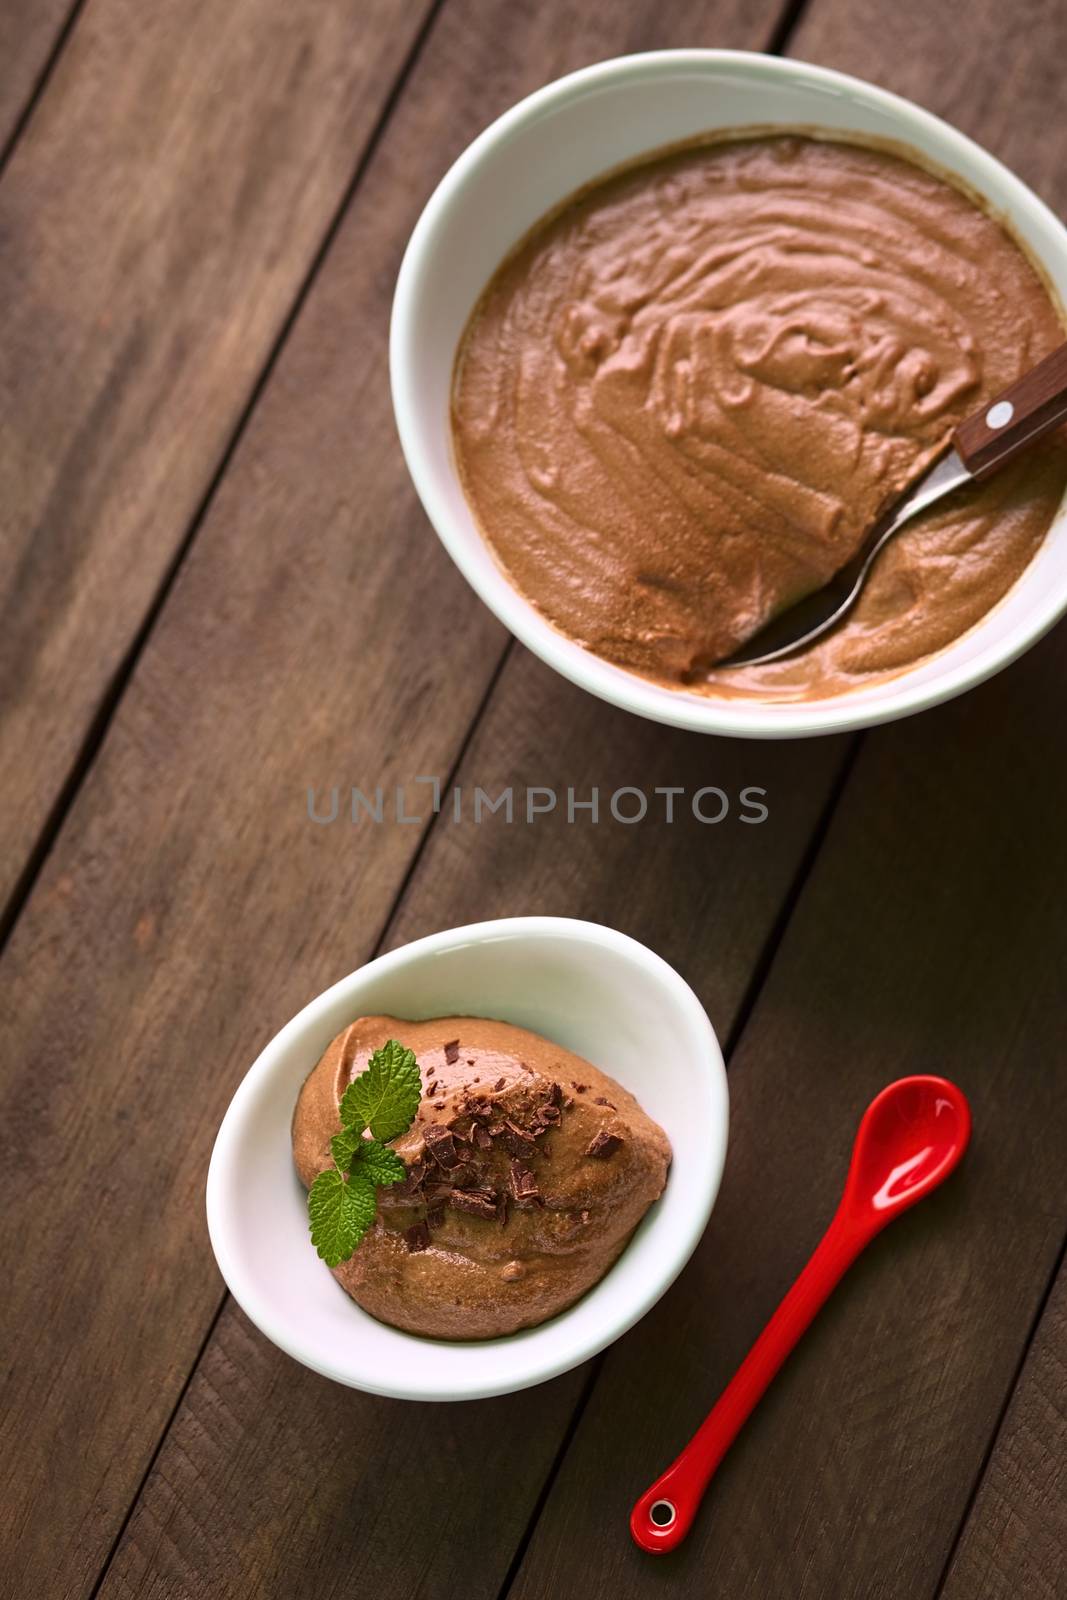 French dessert called Mousse au Chocolat, made of melted chocolate, egg, cream and sugar served in small bowl and garnished with grated chocolate and lemon balm leaf (Selective Focus, Focus onto the dessert in the small bowl)